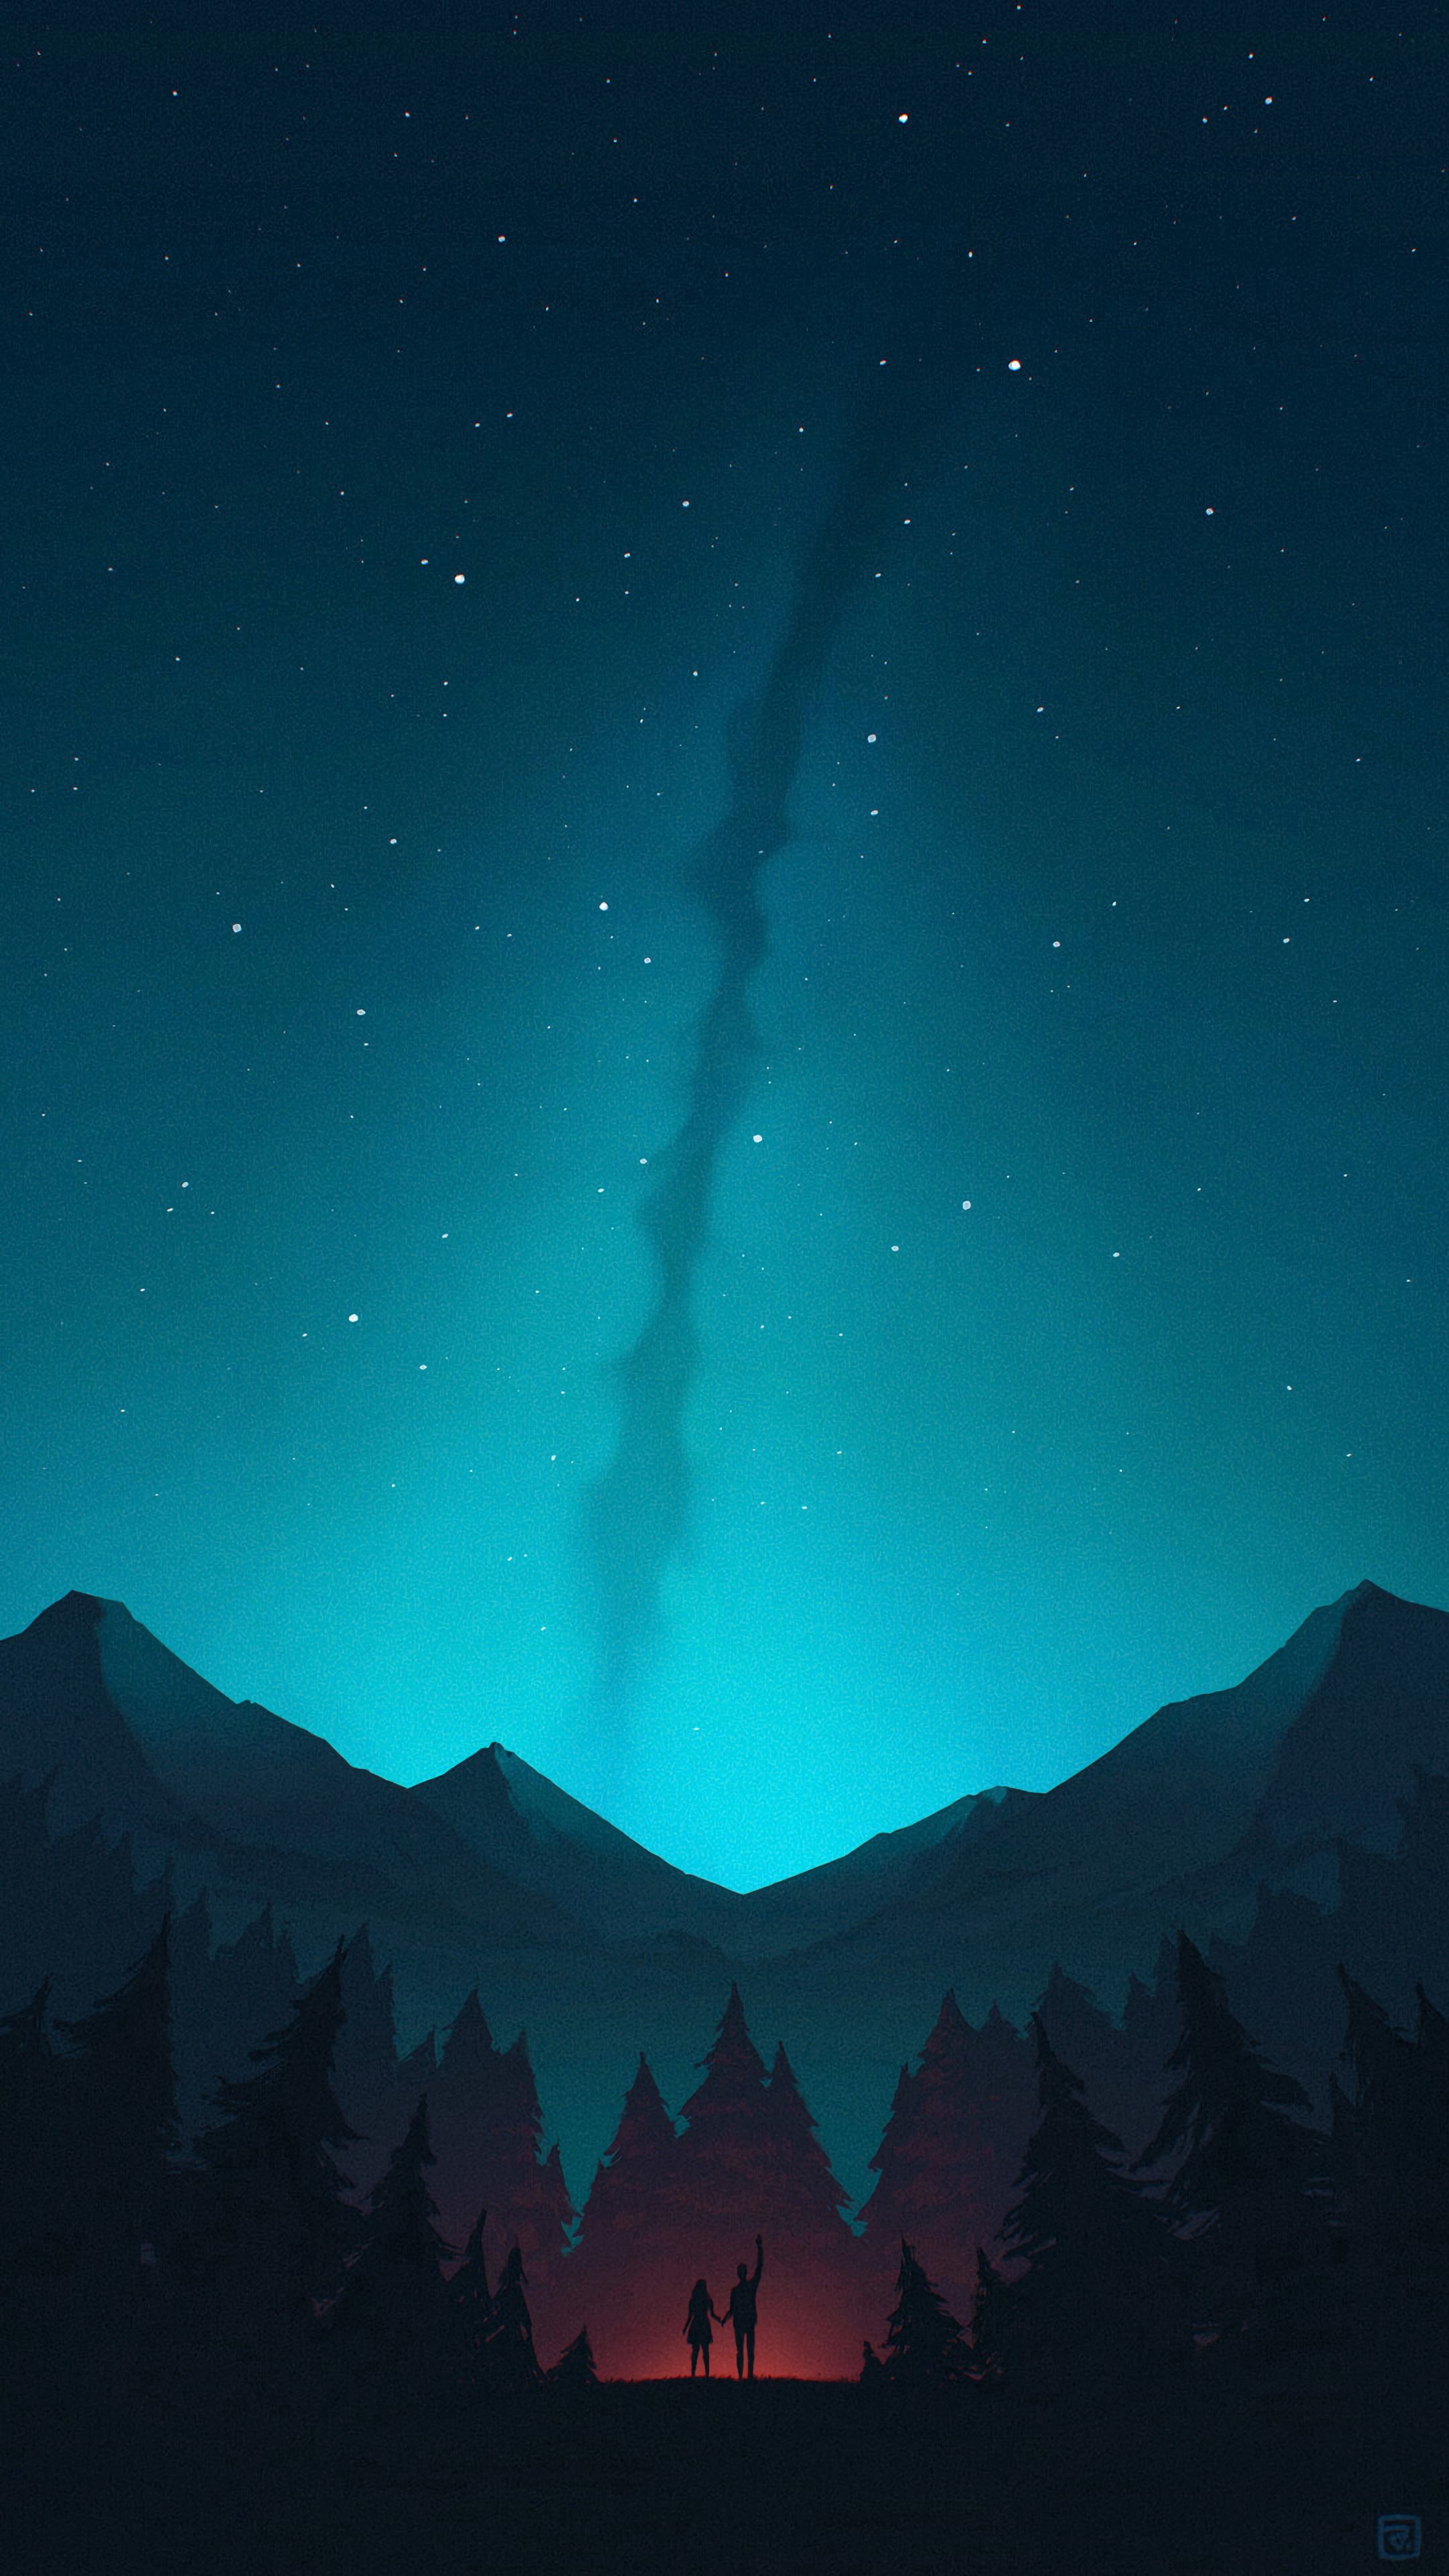 art, night, silhouettes, mountains, forest, starry sky Full HD